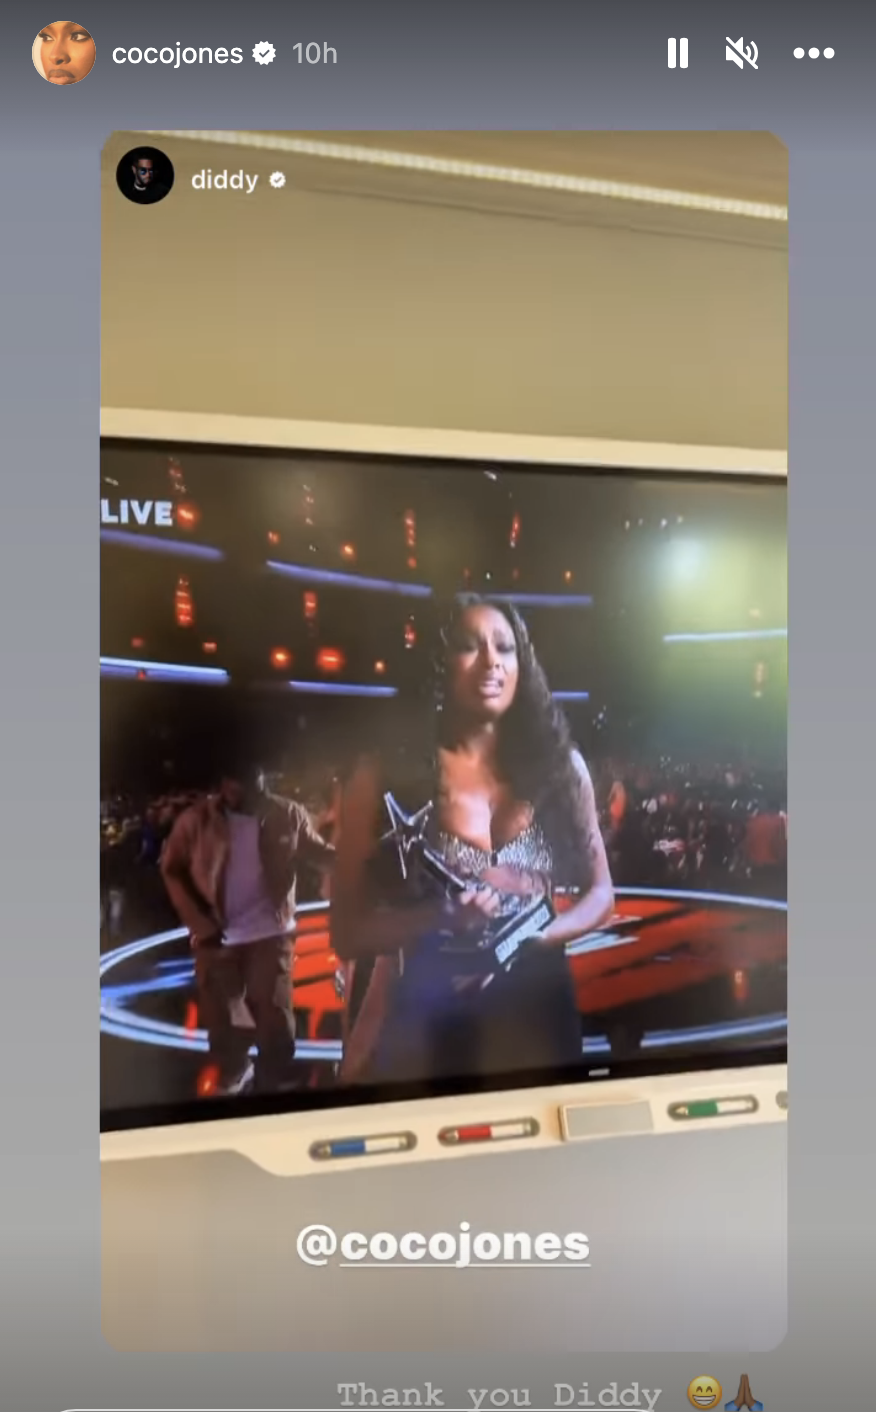 Coco posted Diddy posting her on his IG accepting her award on TV with caption "Thank you Diddy"